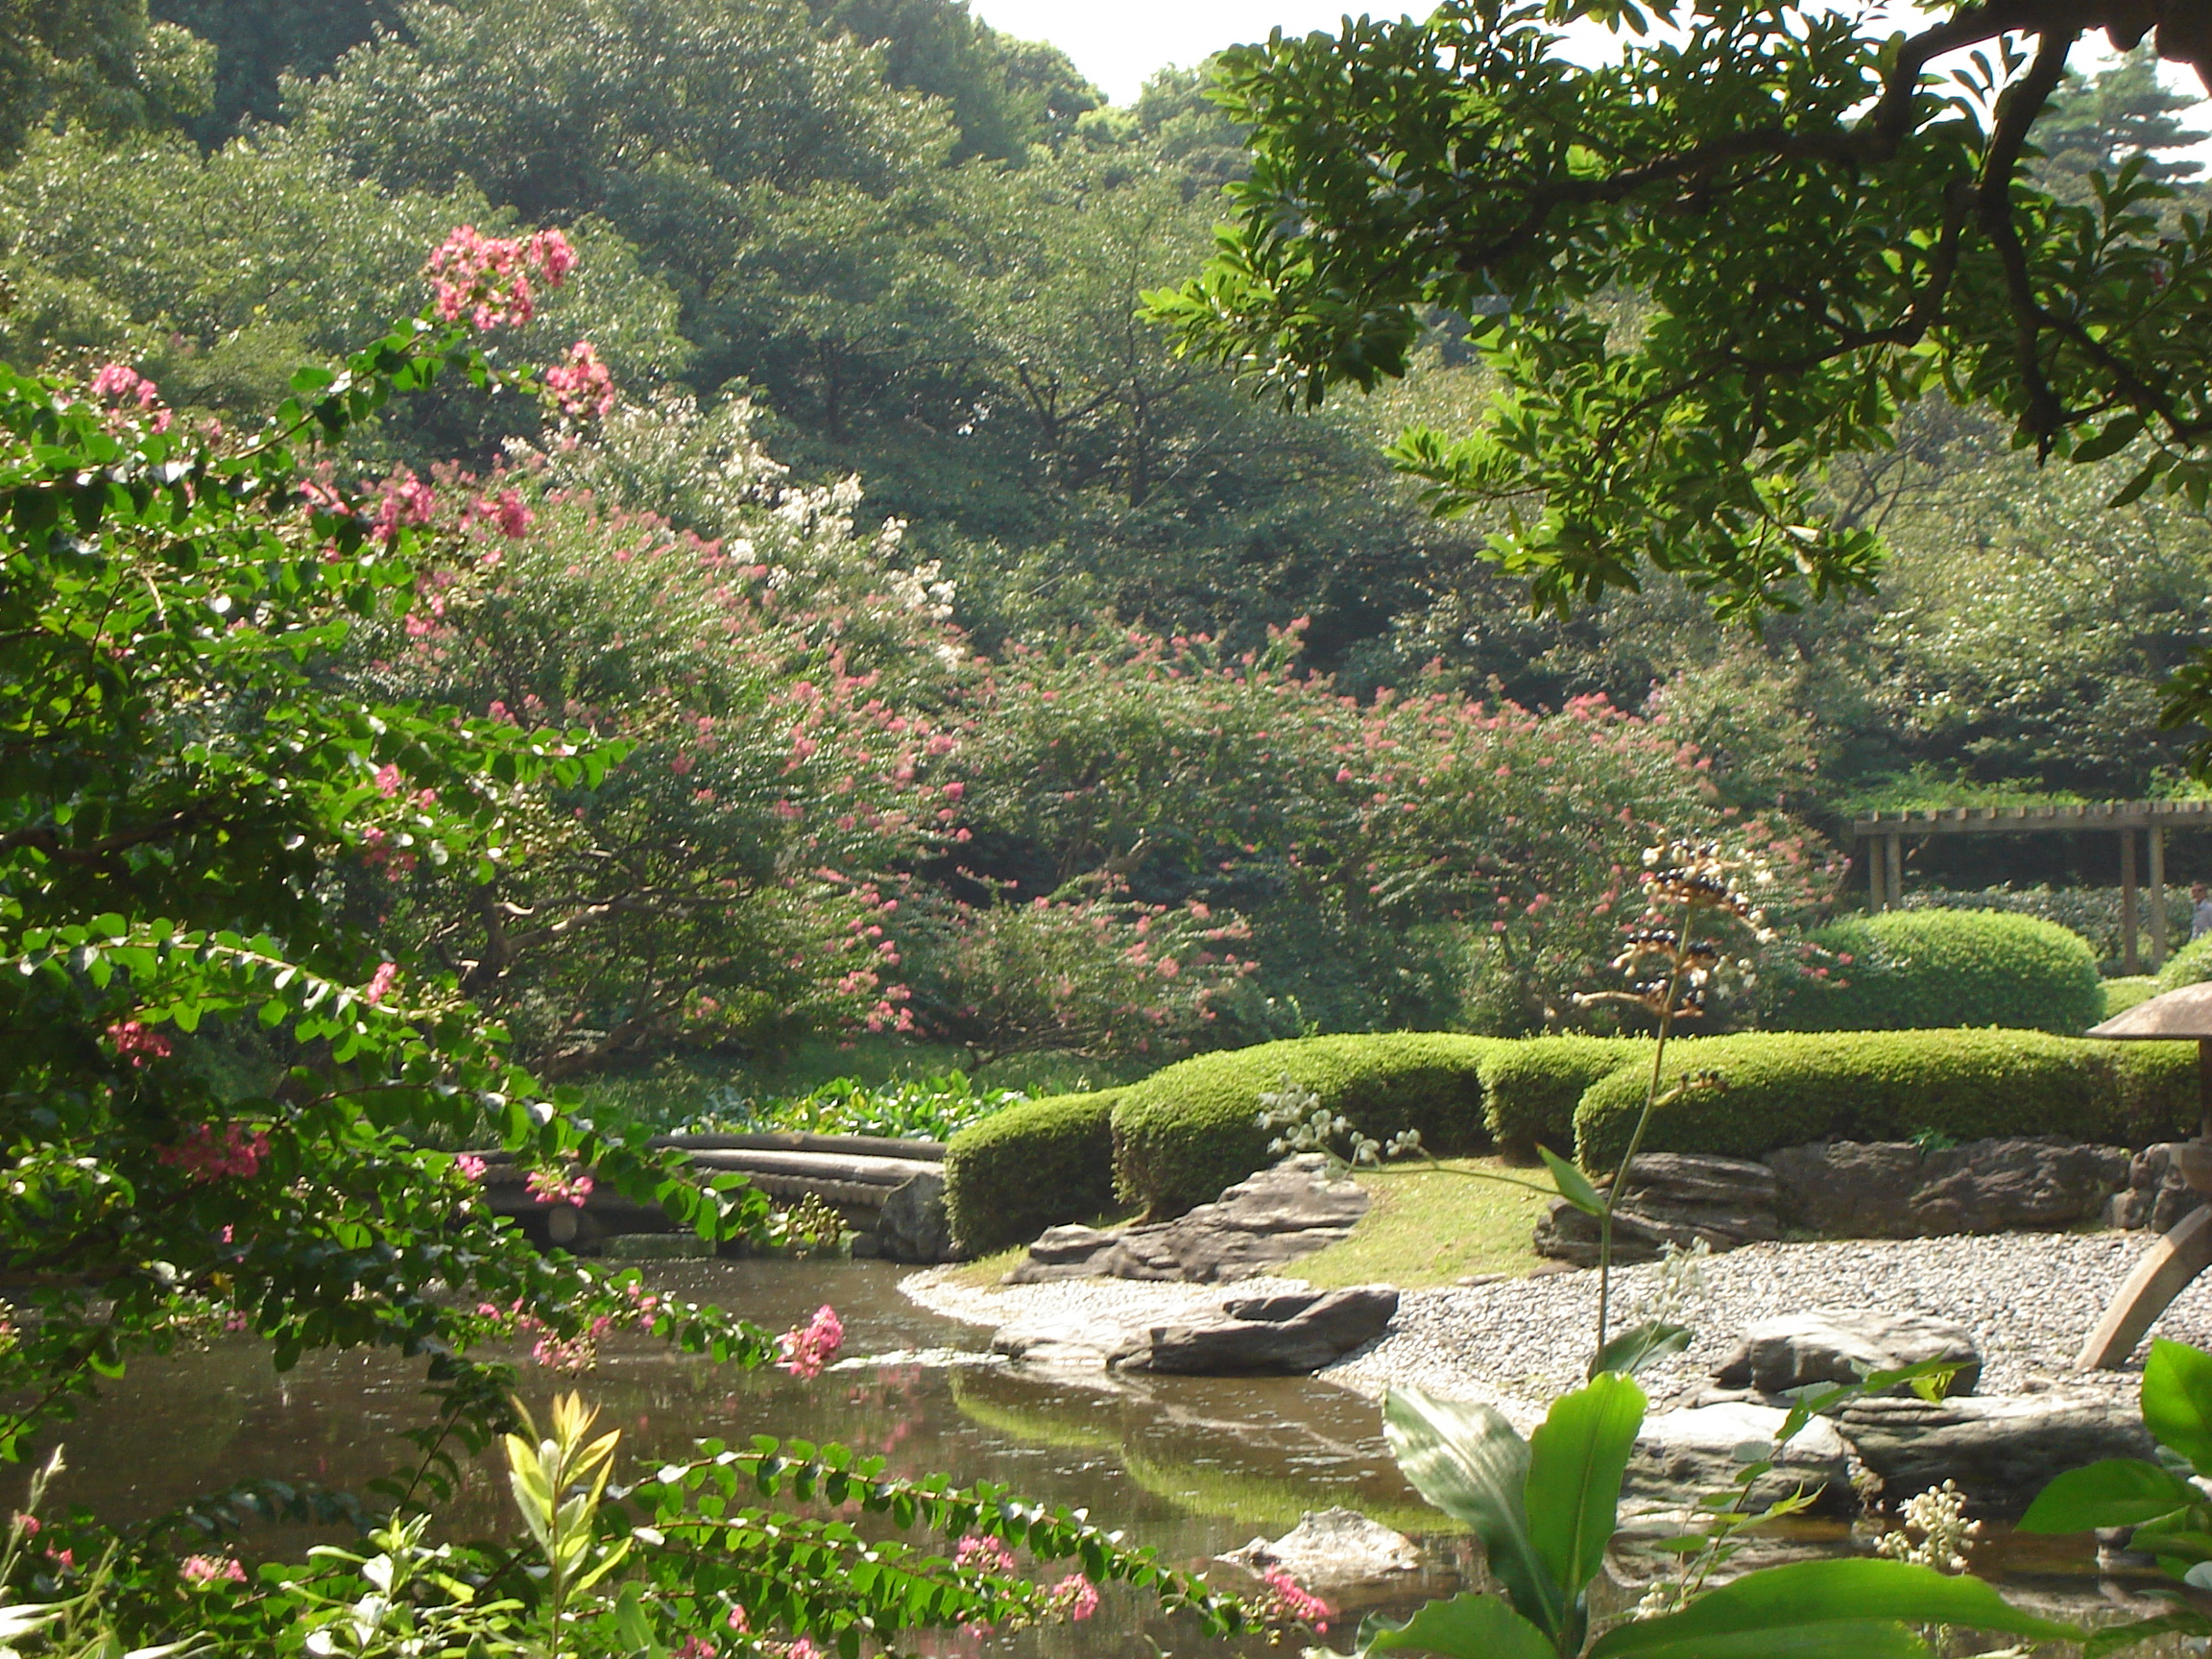 a variety of flowering shrubs, hedges, and trees surround a water feature